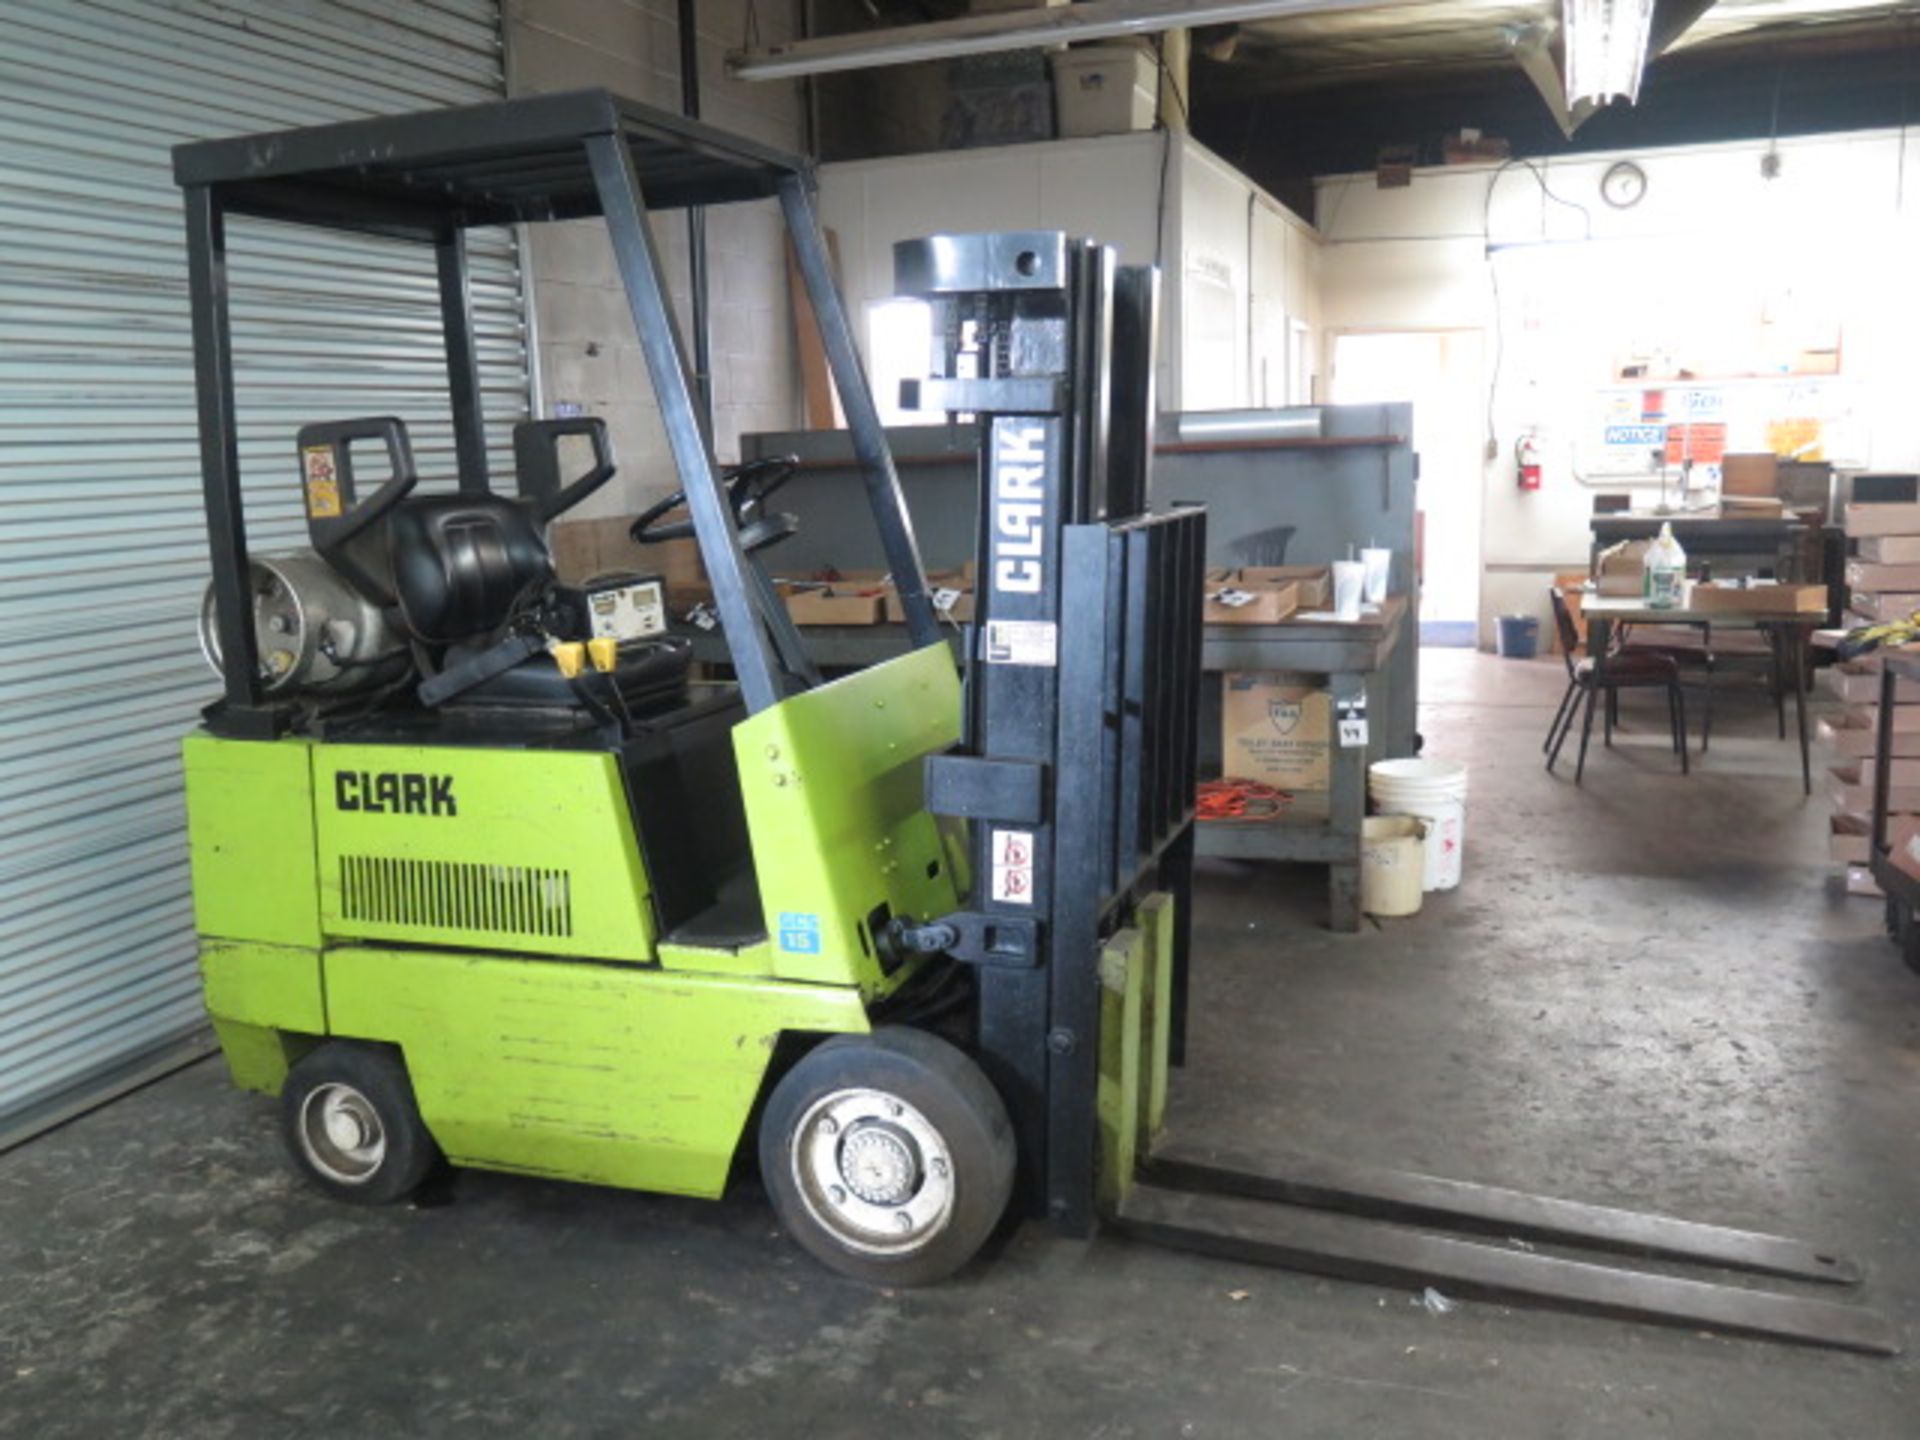 Clark GCS15 3000 Lb Cap LPG Forklift s/n G127-0077-7654-KOF w/ 3-Stage, 152” Lift Height, SOLD AS IS